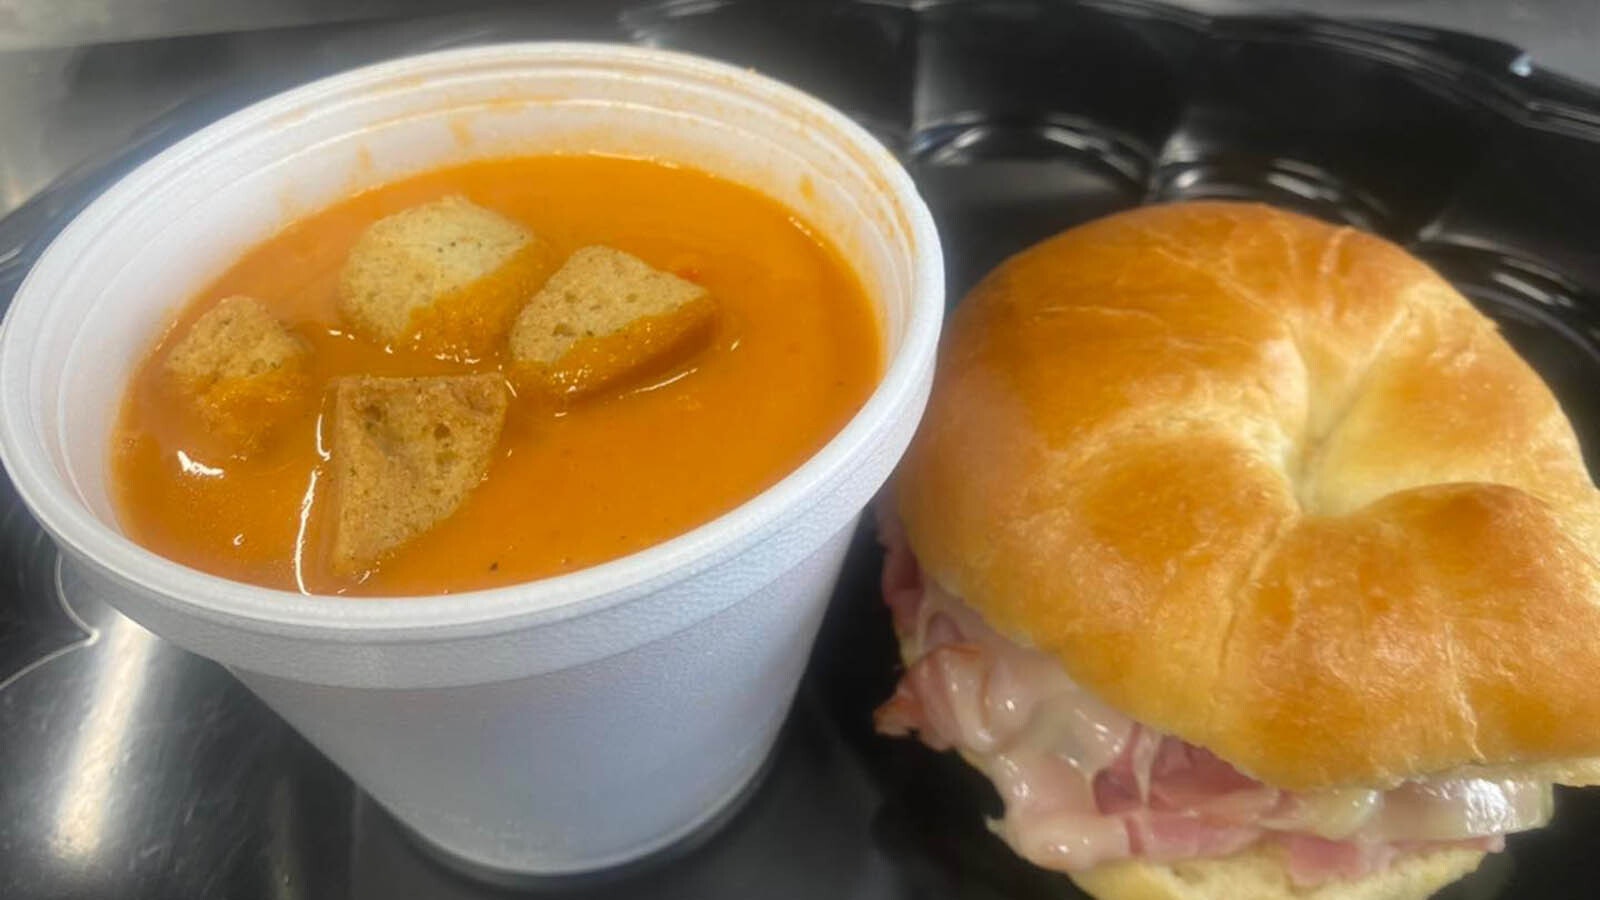 Nothing hits the spot like a hot sandwich and soup.